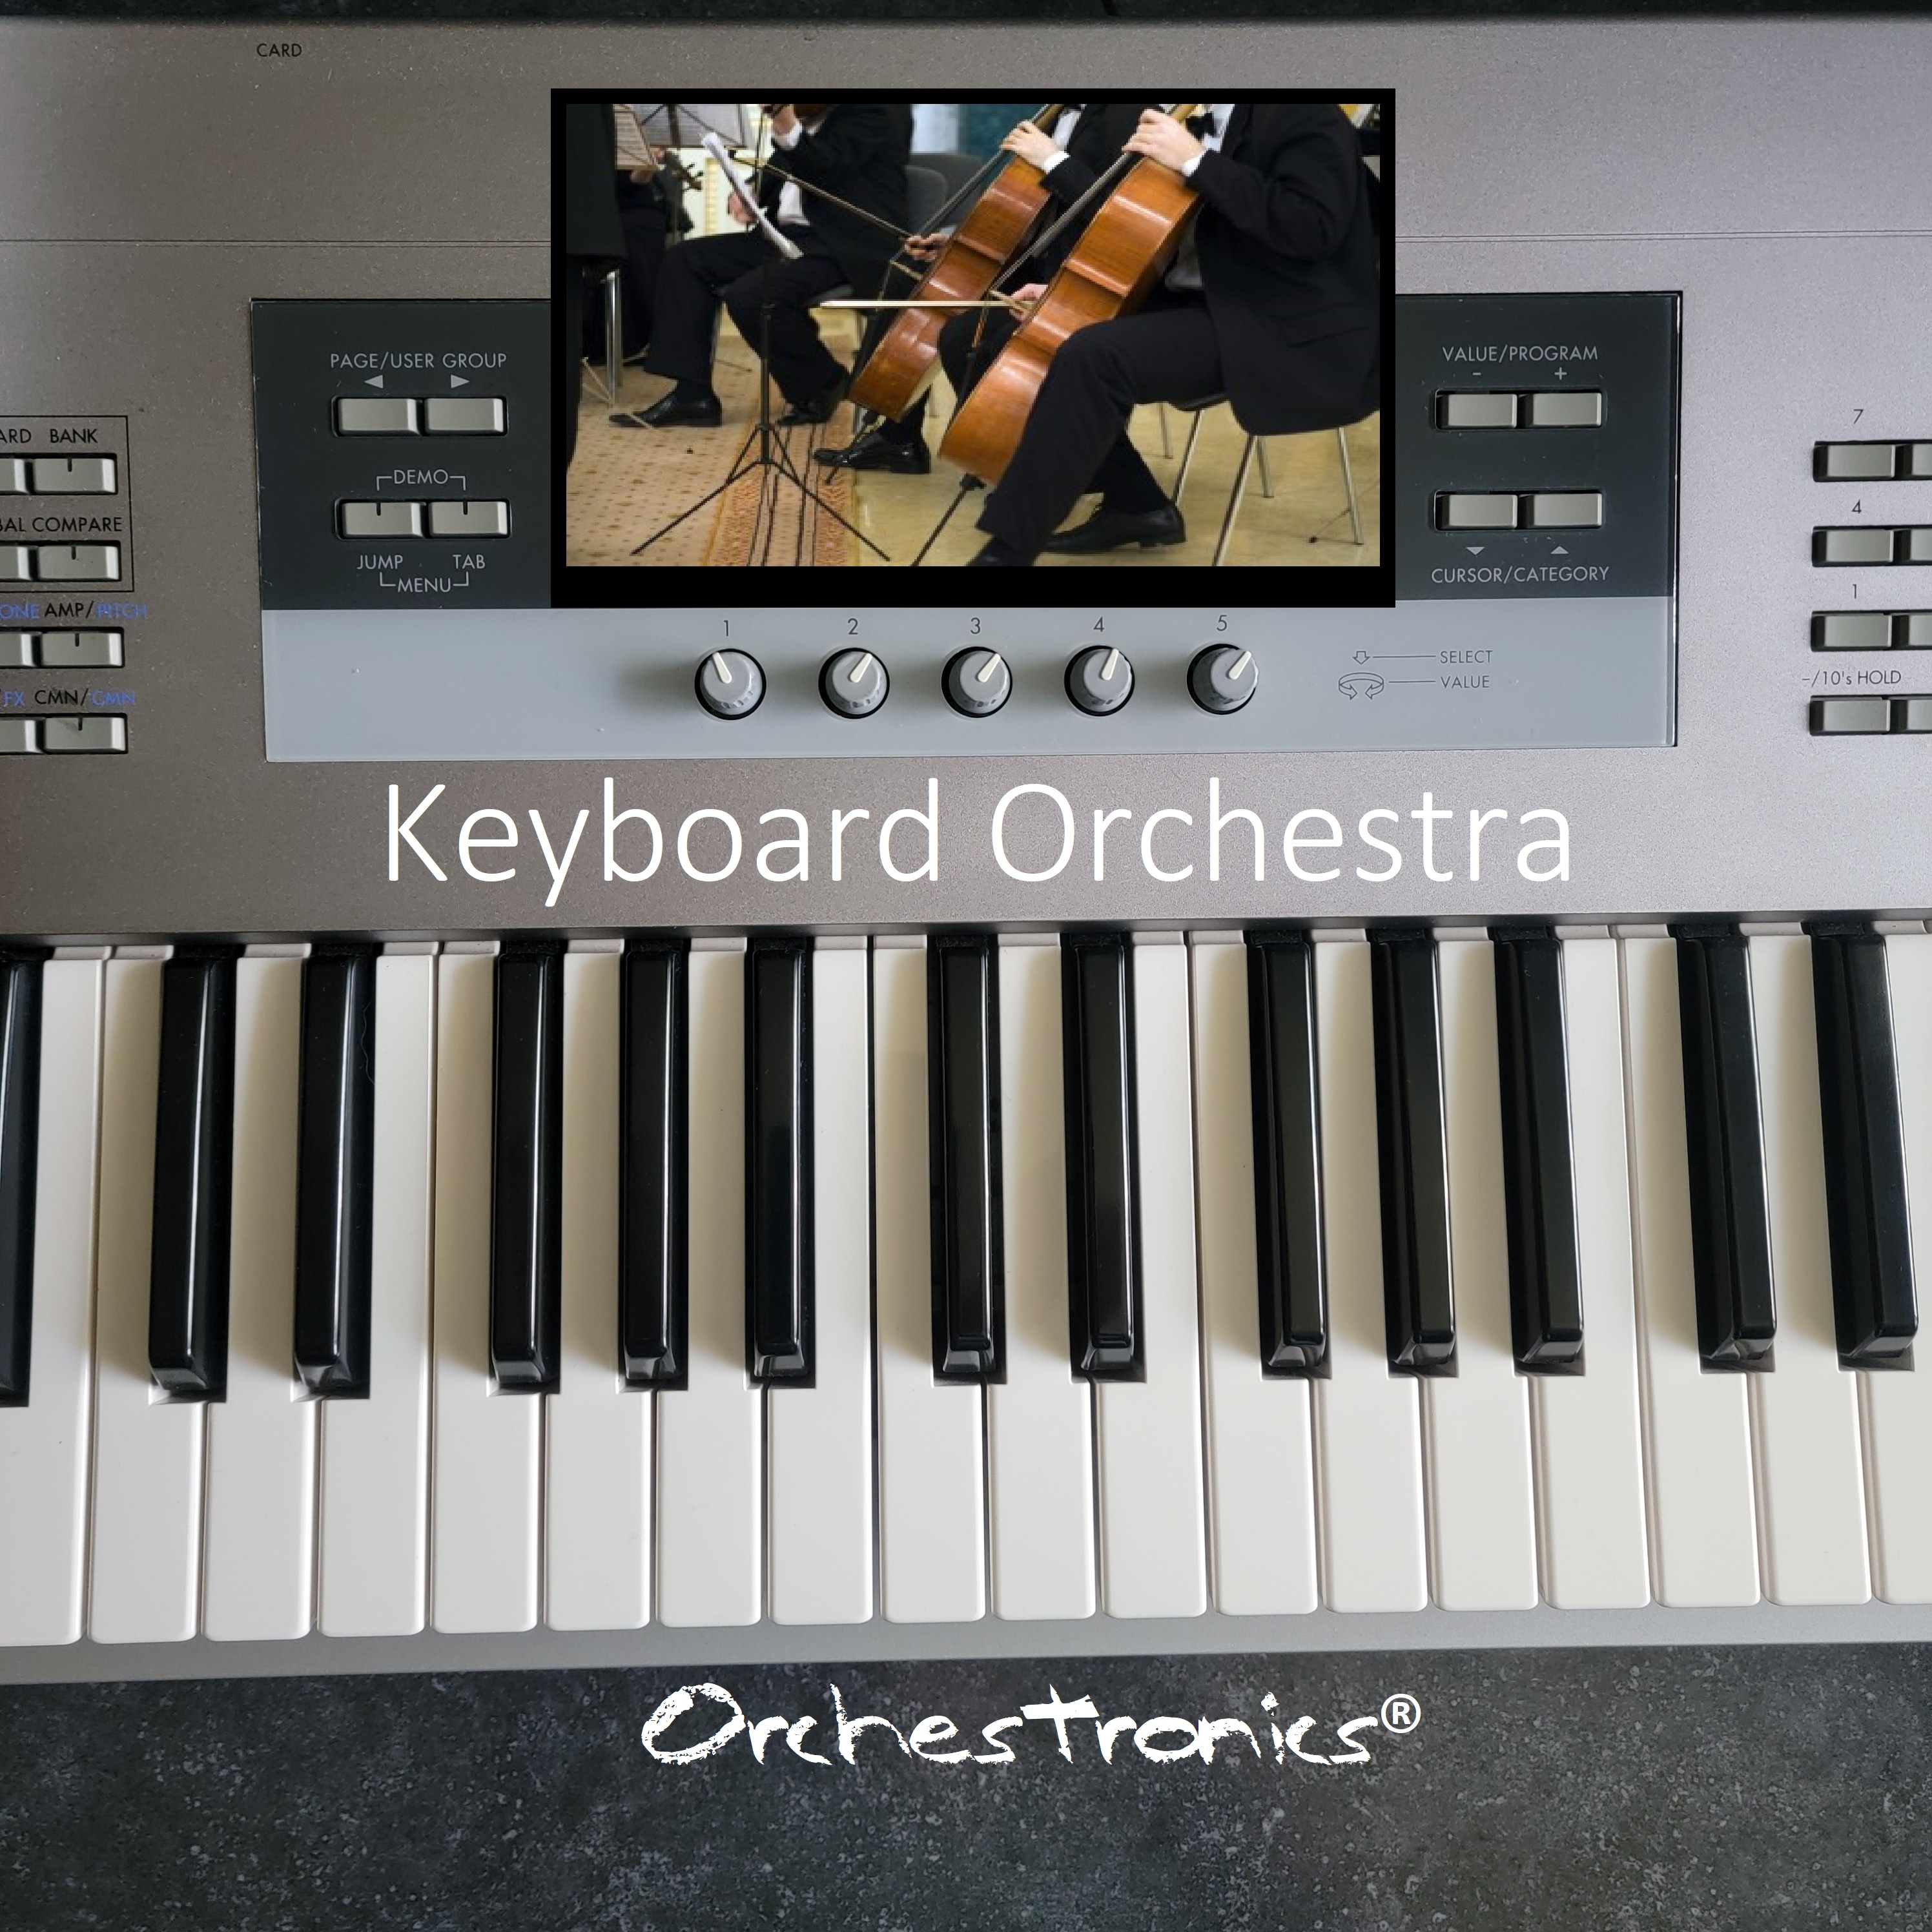 Album: Keyboard Orchestra by Orchestronics